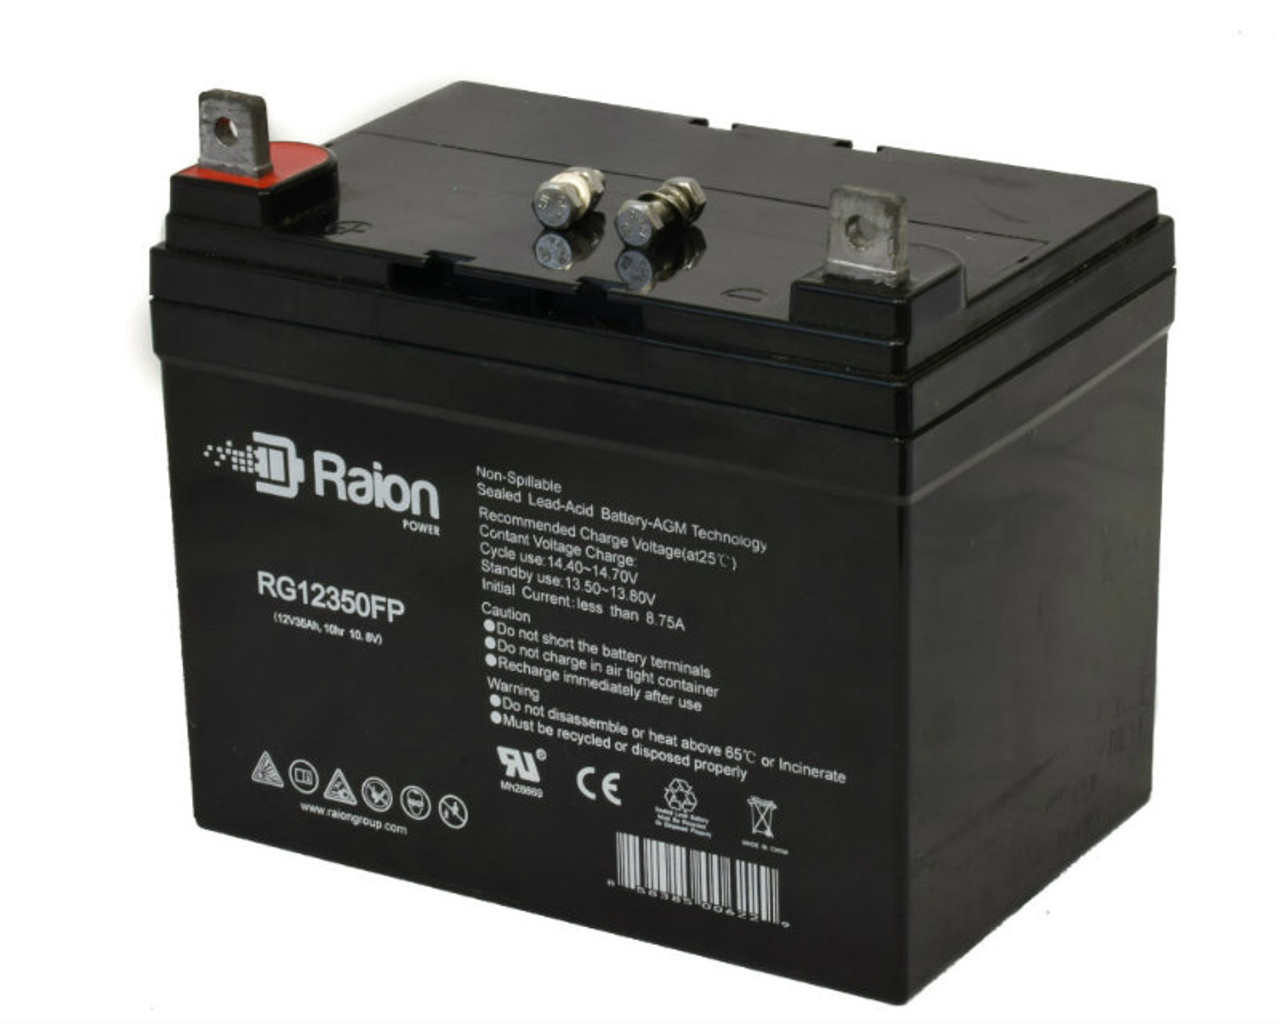 Raion Power Replacement 12V 35Ah RG12350FP Mobility Scooter Battery for Quickie V121 (14 inches wide)